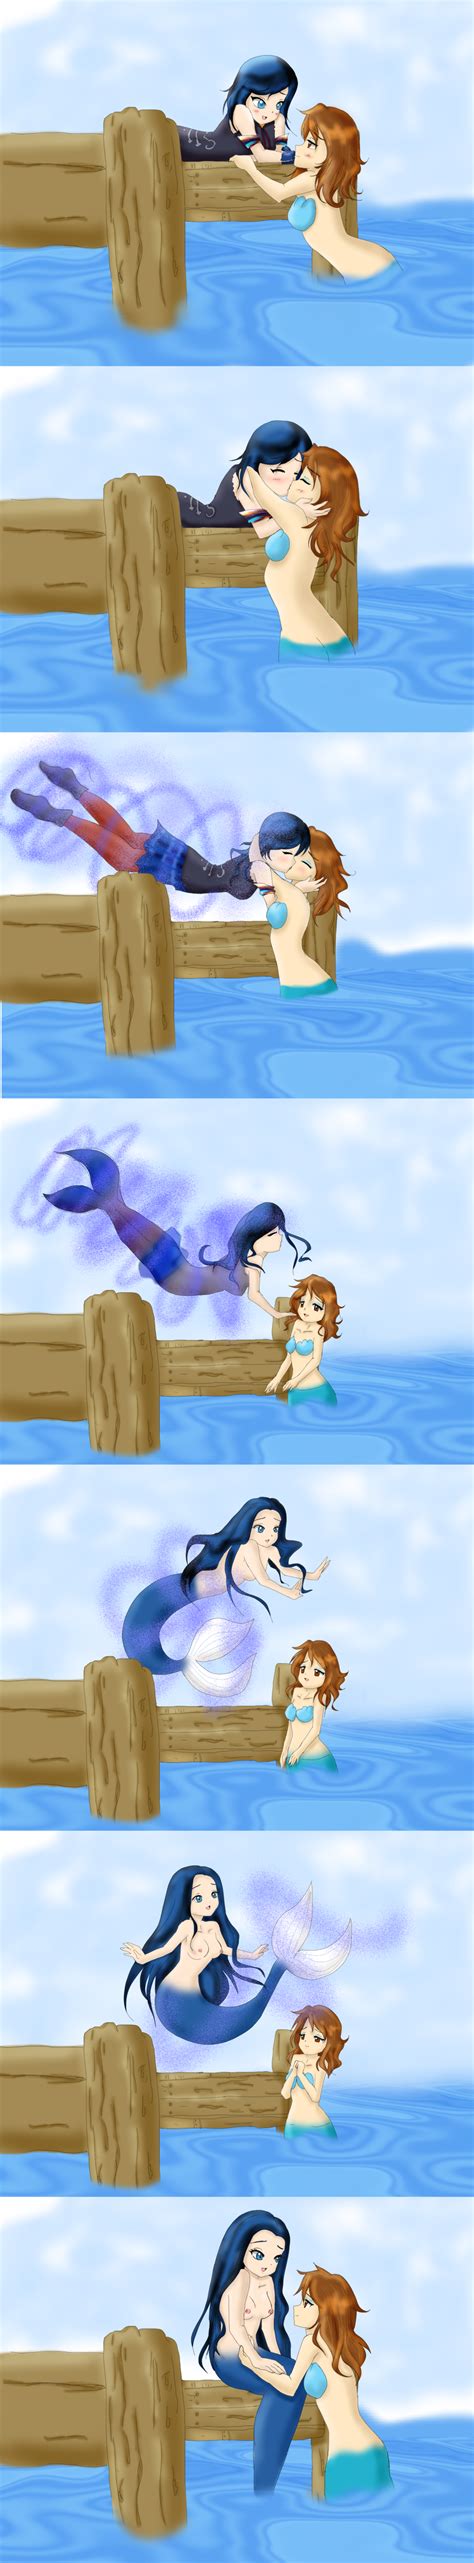 Mermaid Transformation Favourites By Puzzle1022 On Deviantart